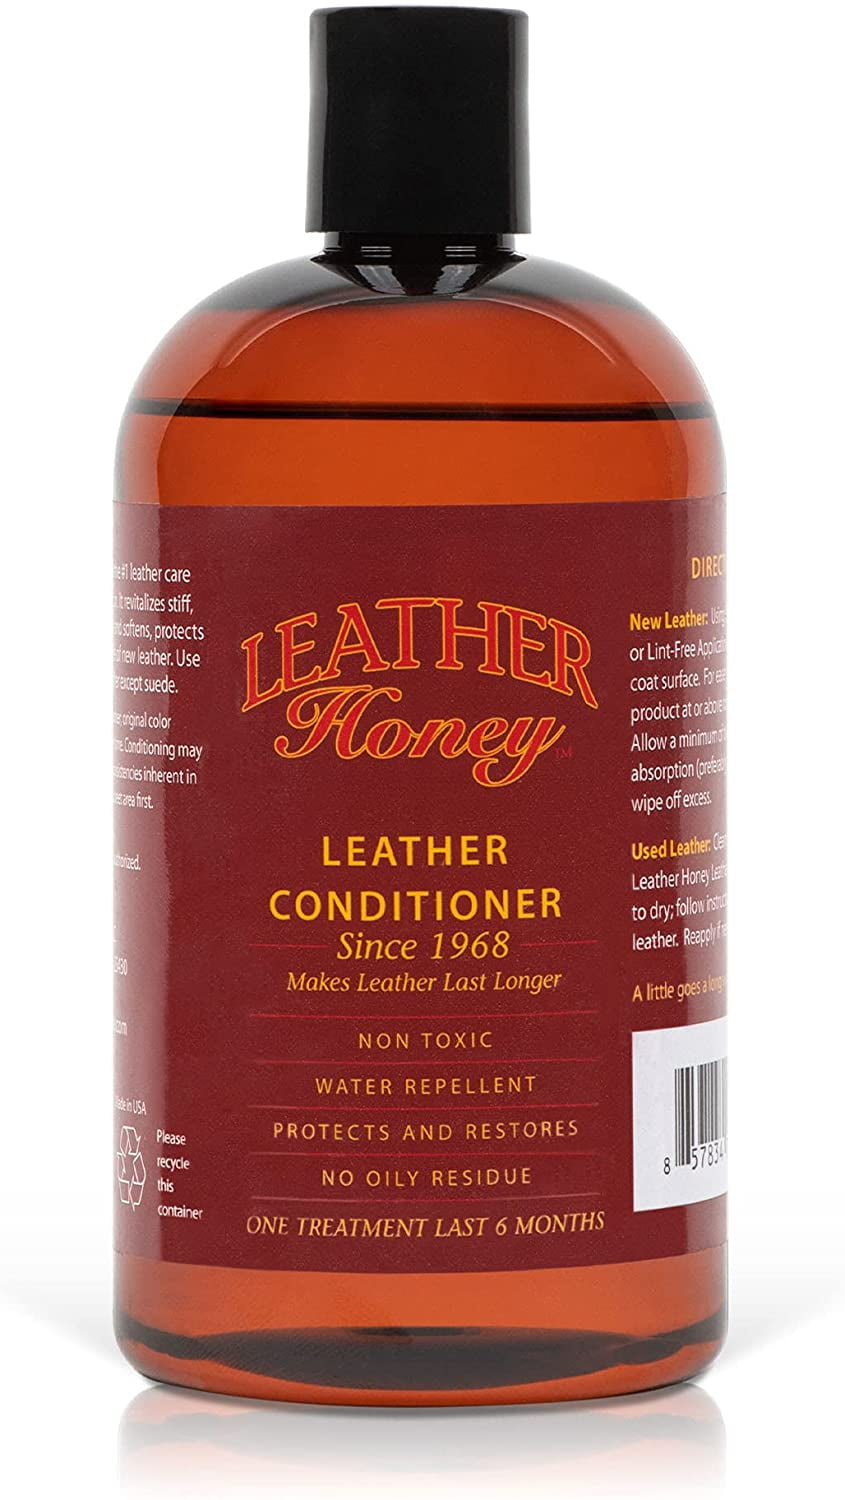  Apple Leather Care Leather Conditioner 8oz Bottle